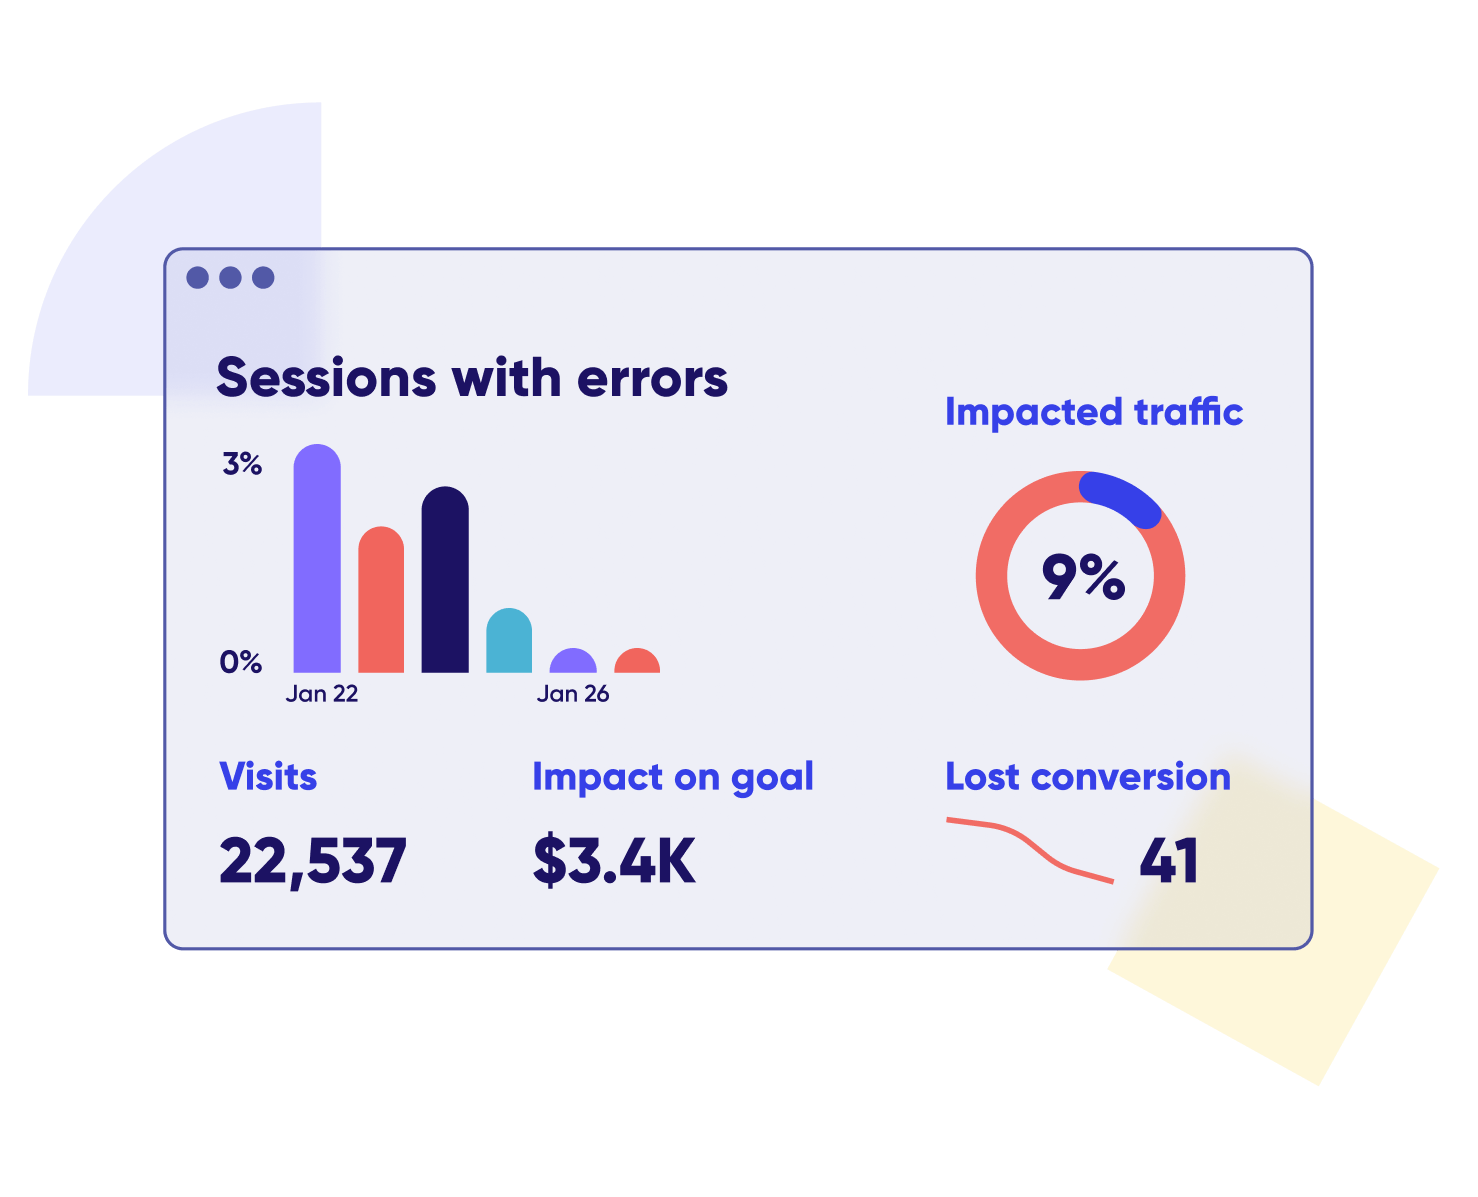 automated insights display metrics such as sessions, visits and impact on overall goal for the website